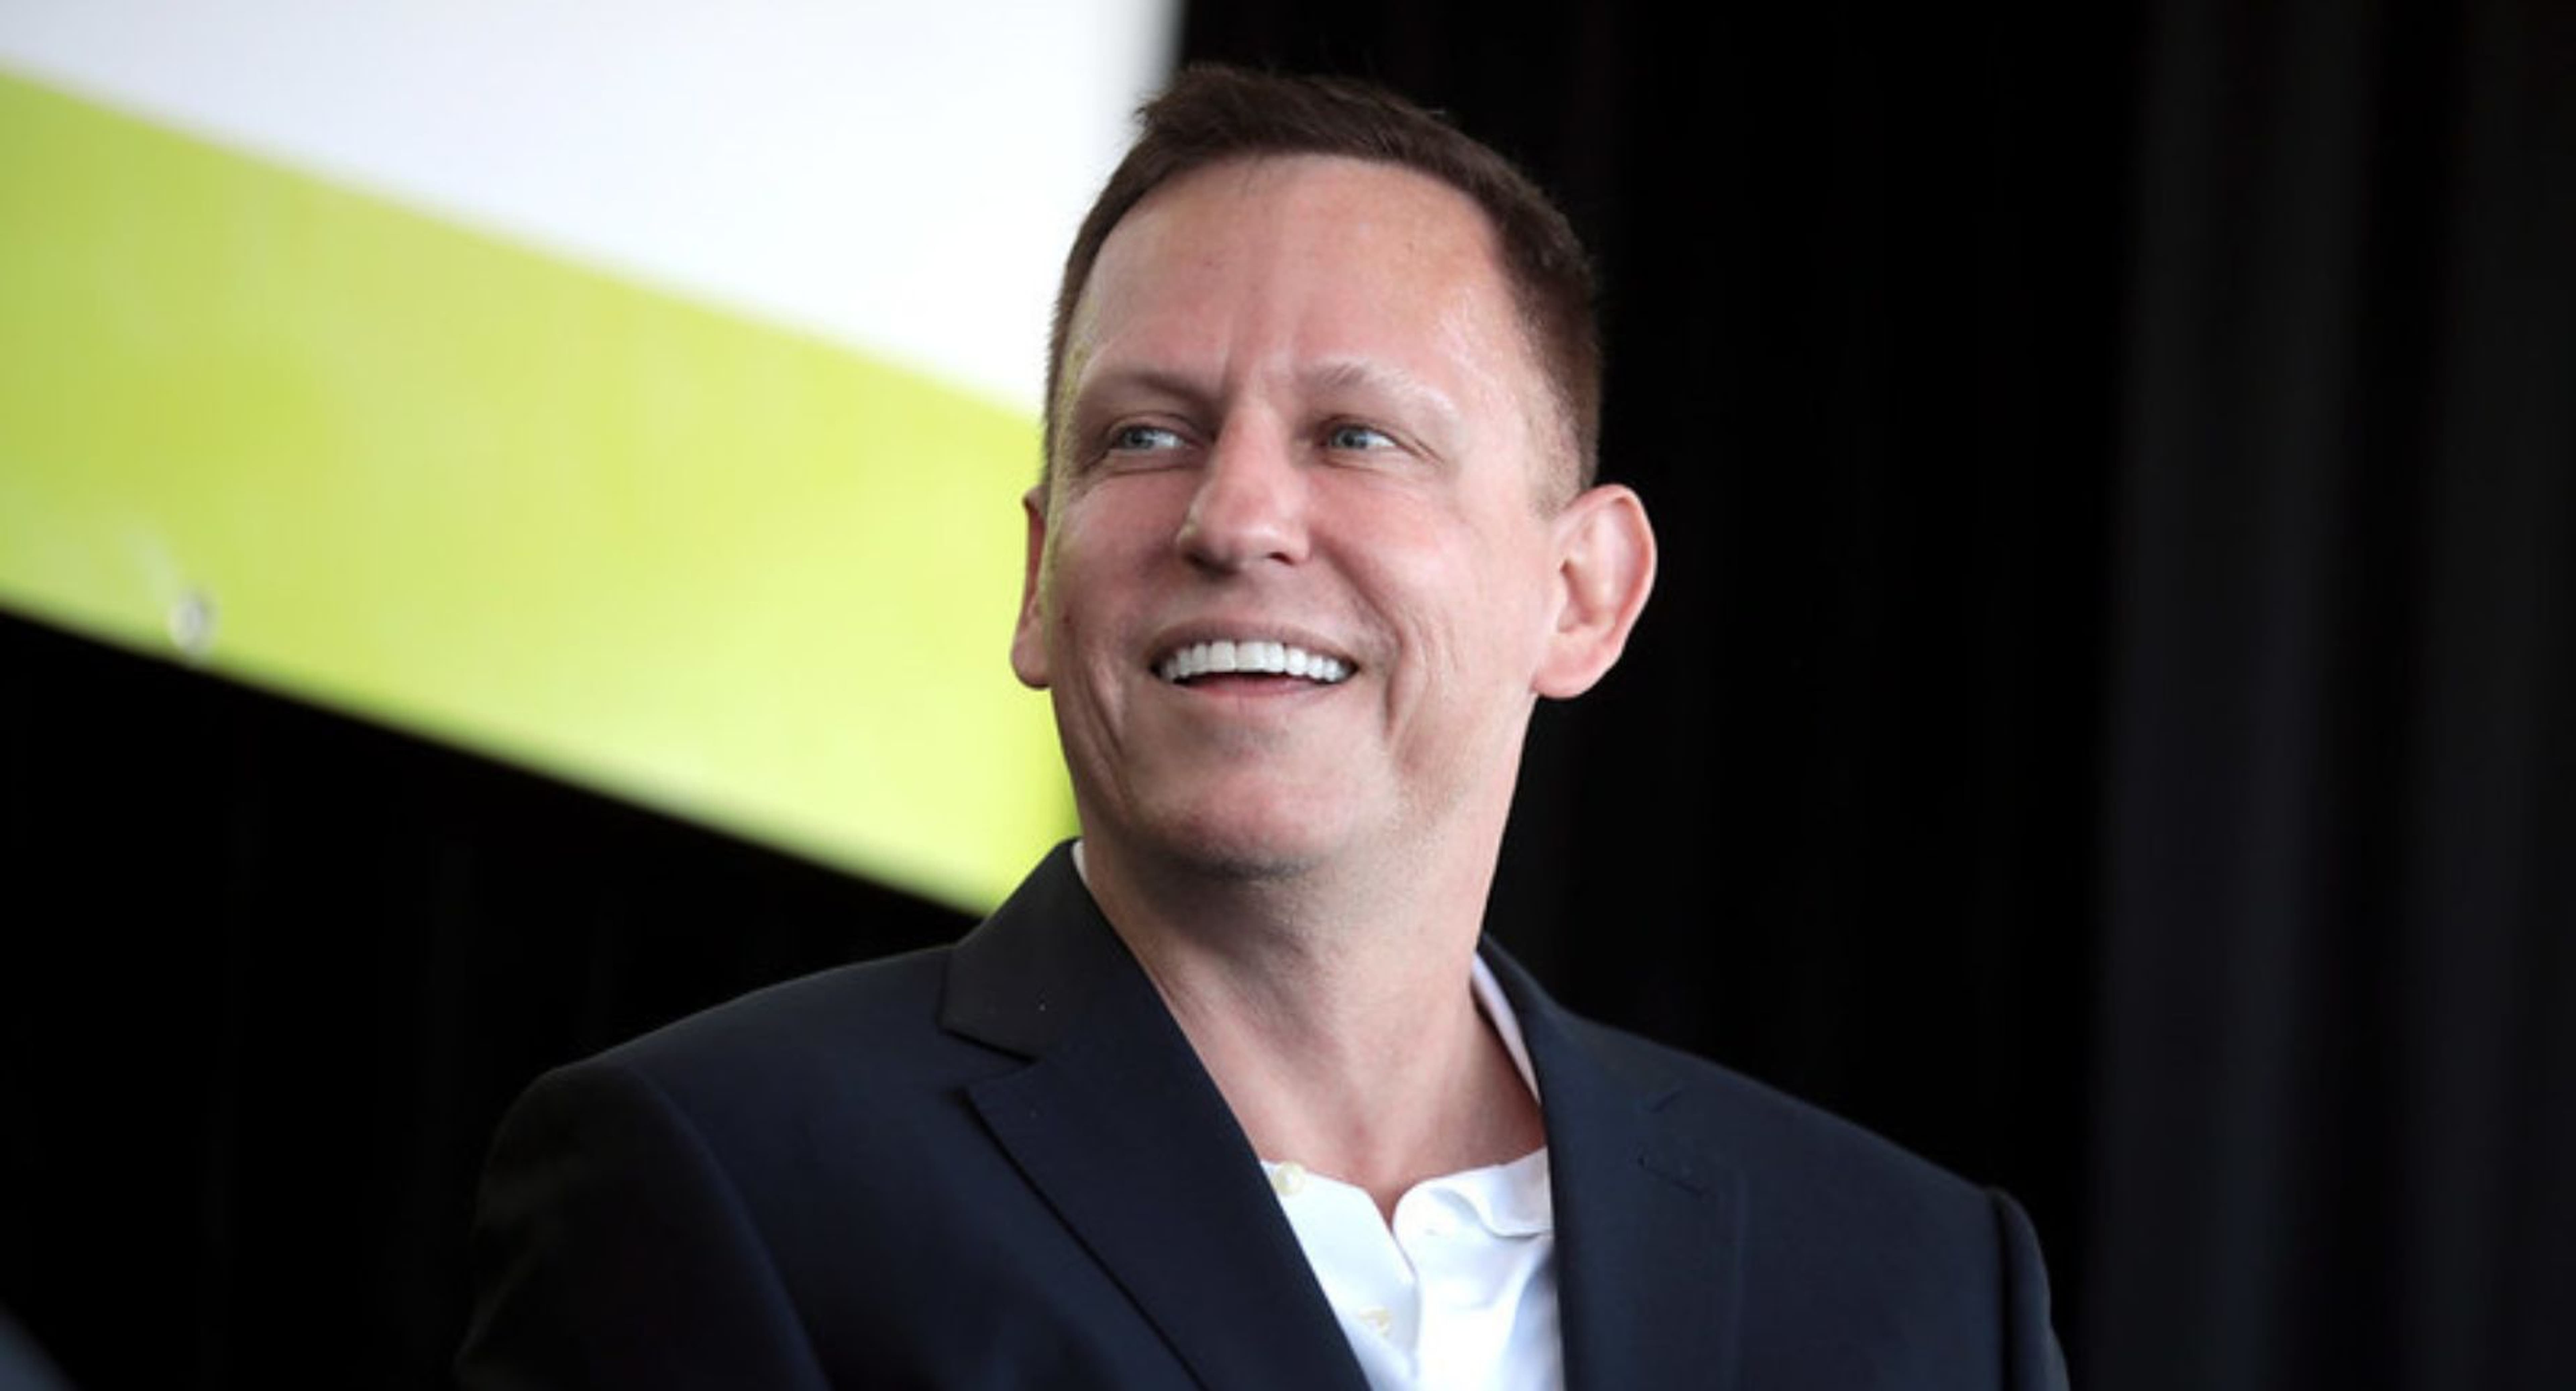 Will Peter Thiel Get Summoned By Congress Over SVB? It&#39;s Illegal To Promote Bank Runs - But There&#39;s An Out